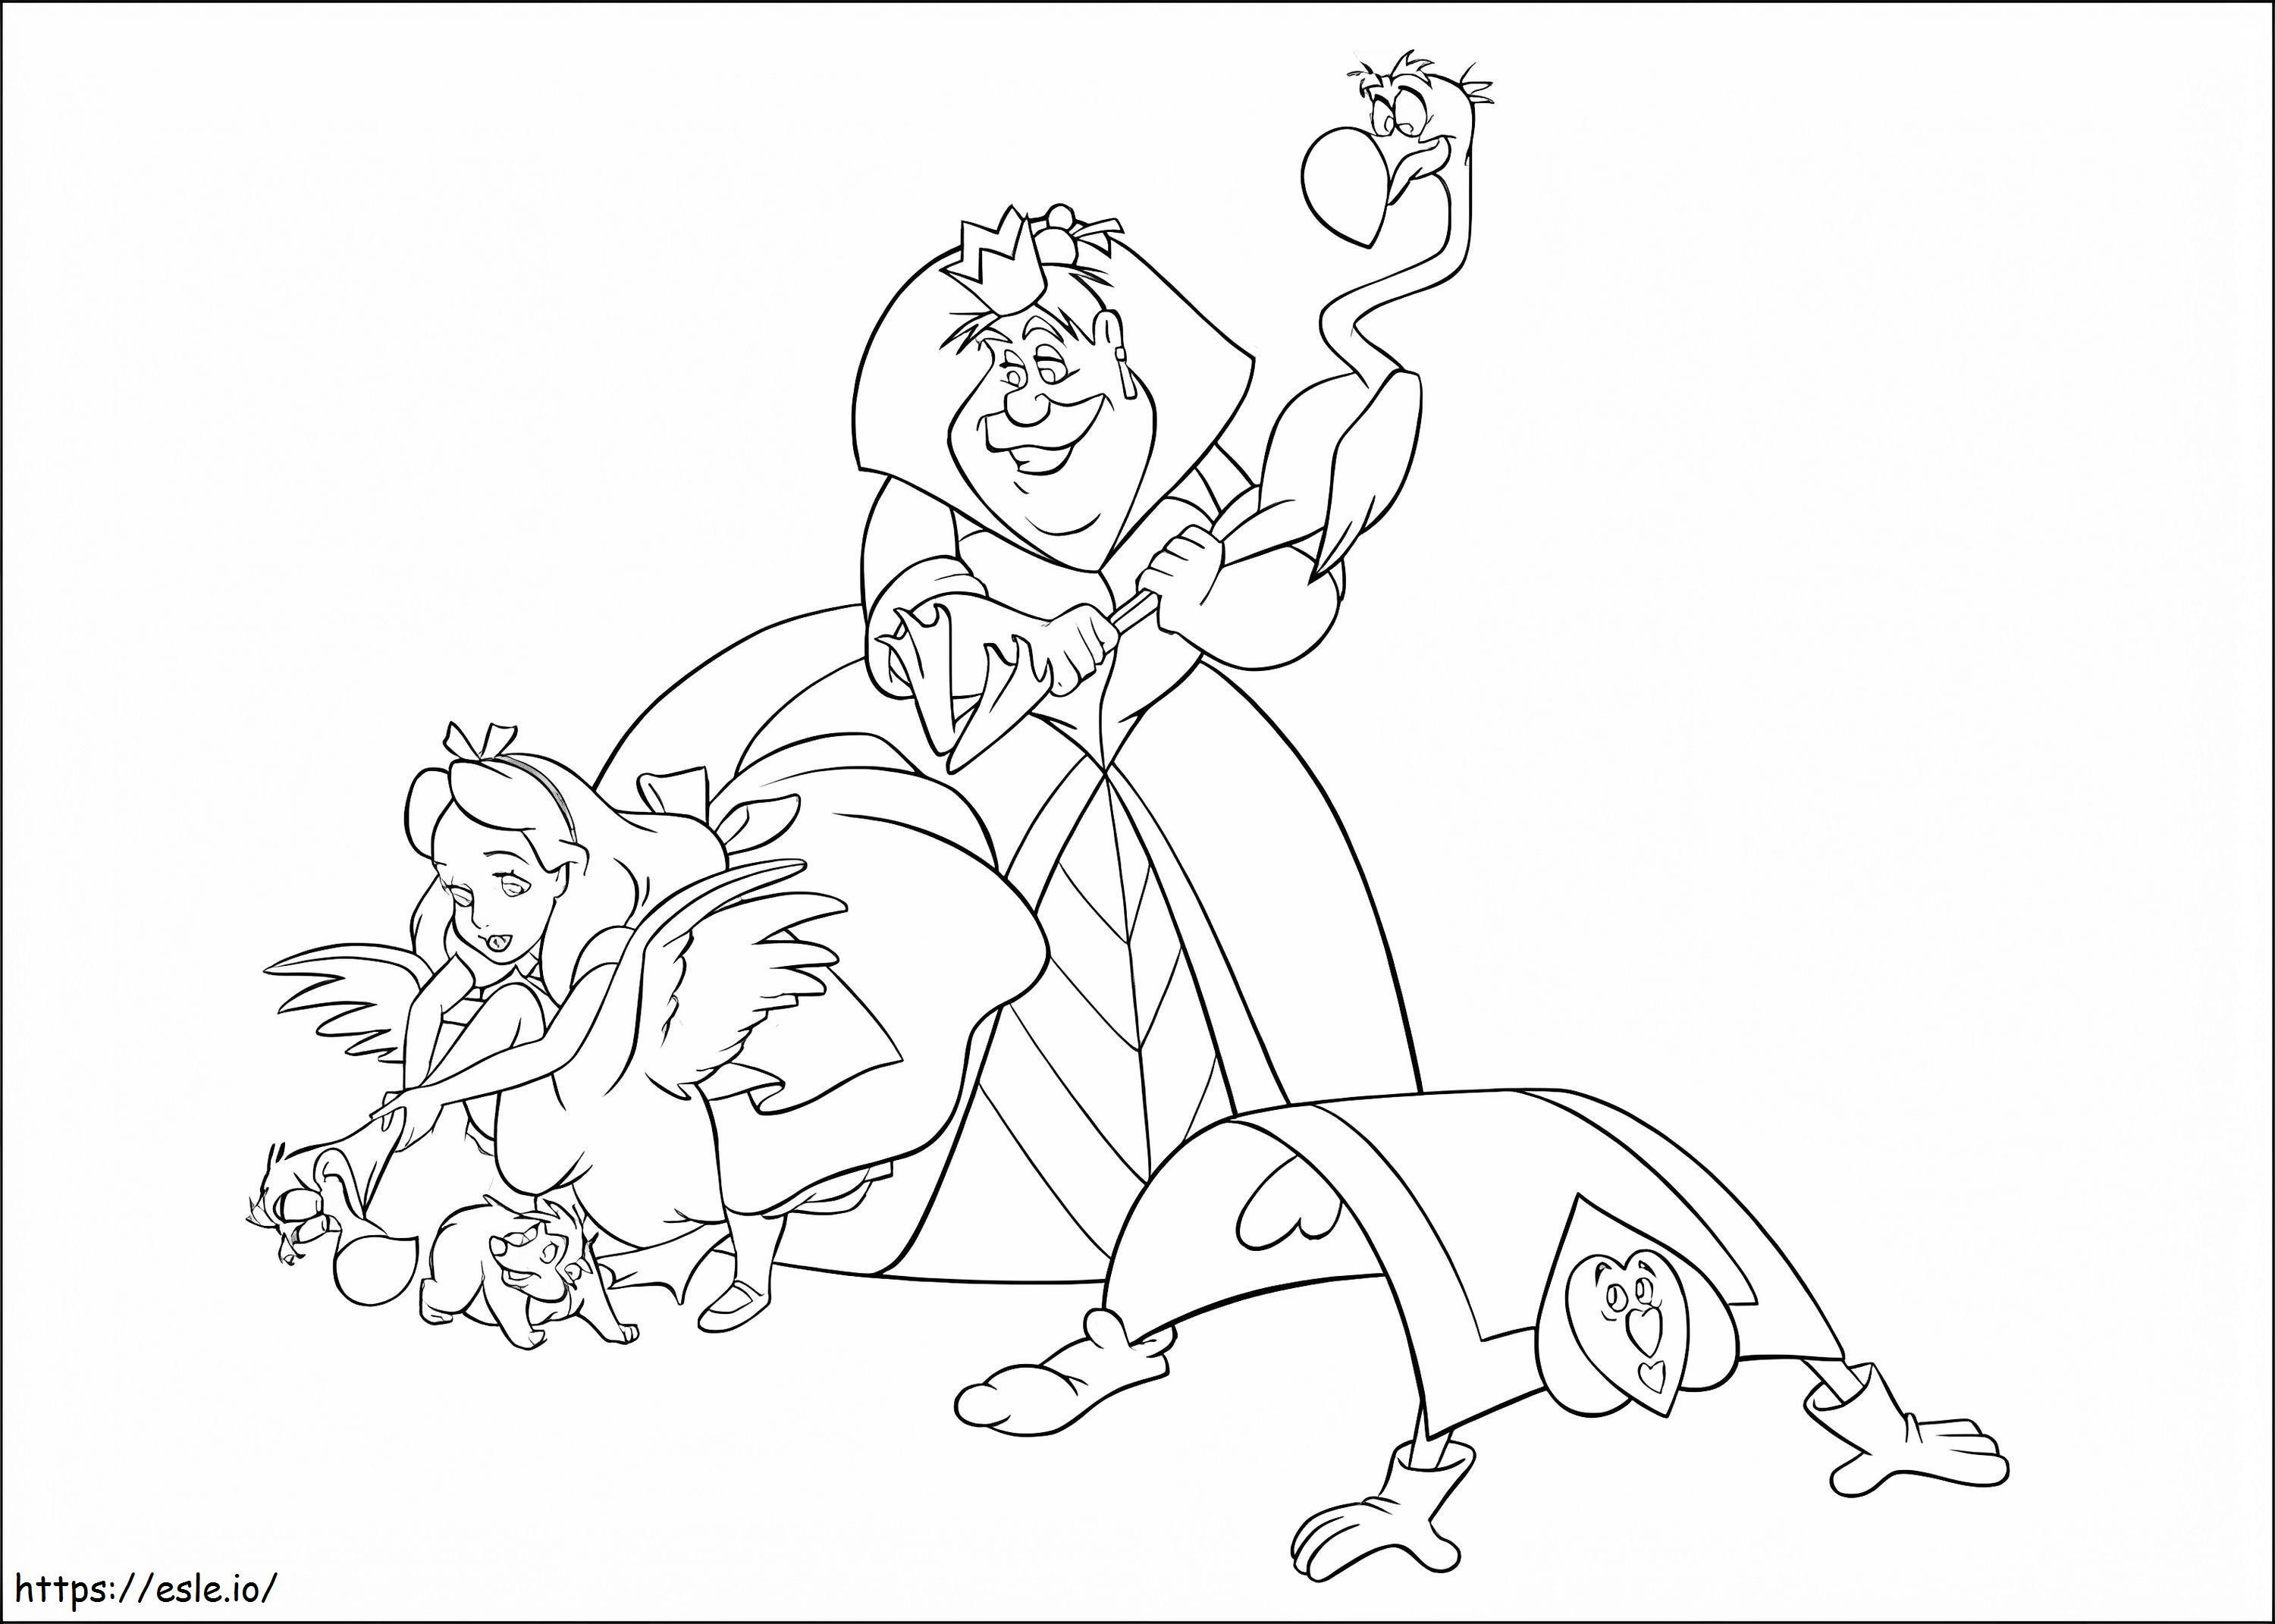 Alice And The Queen Of Hearts coloring page